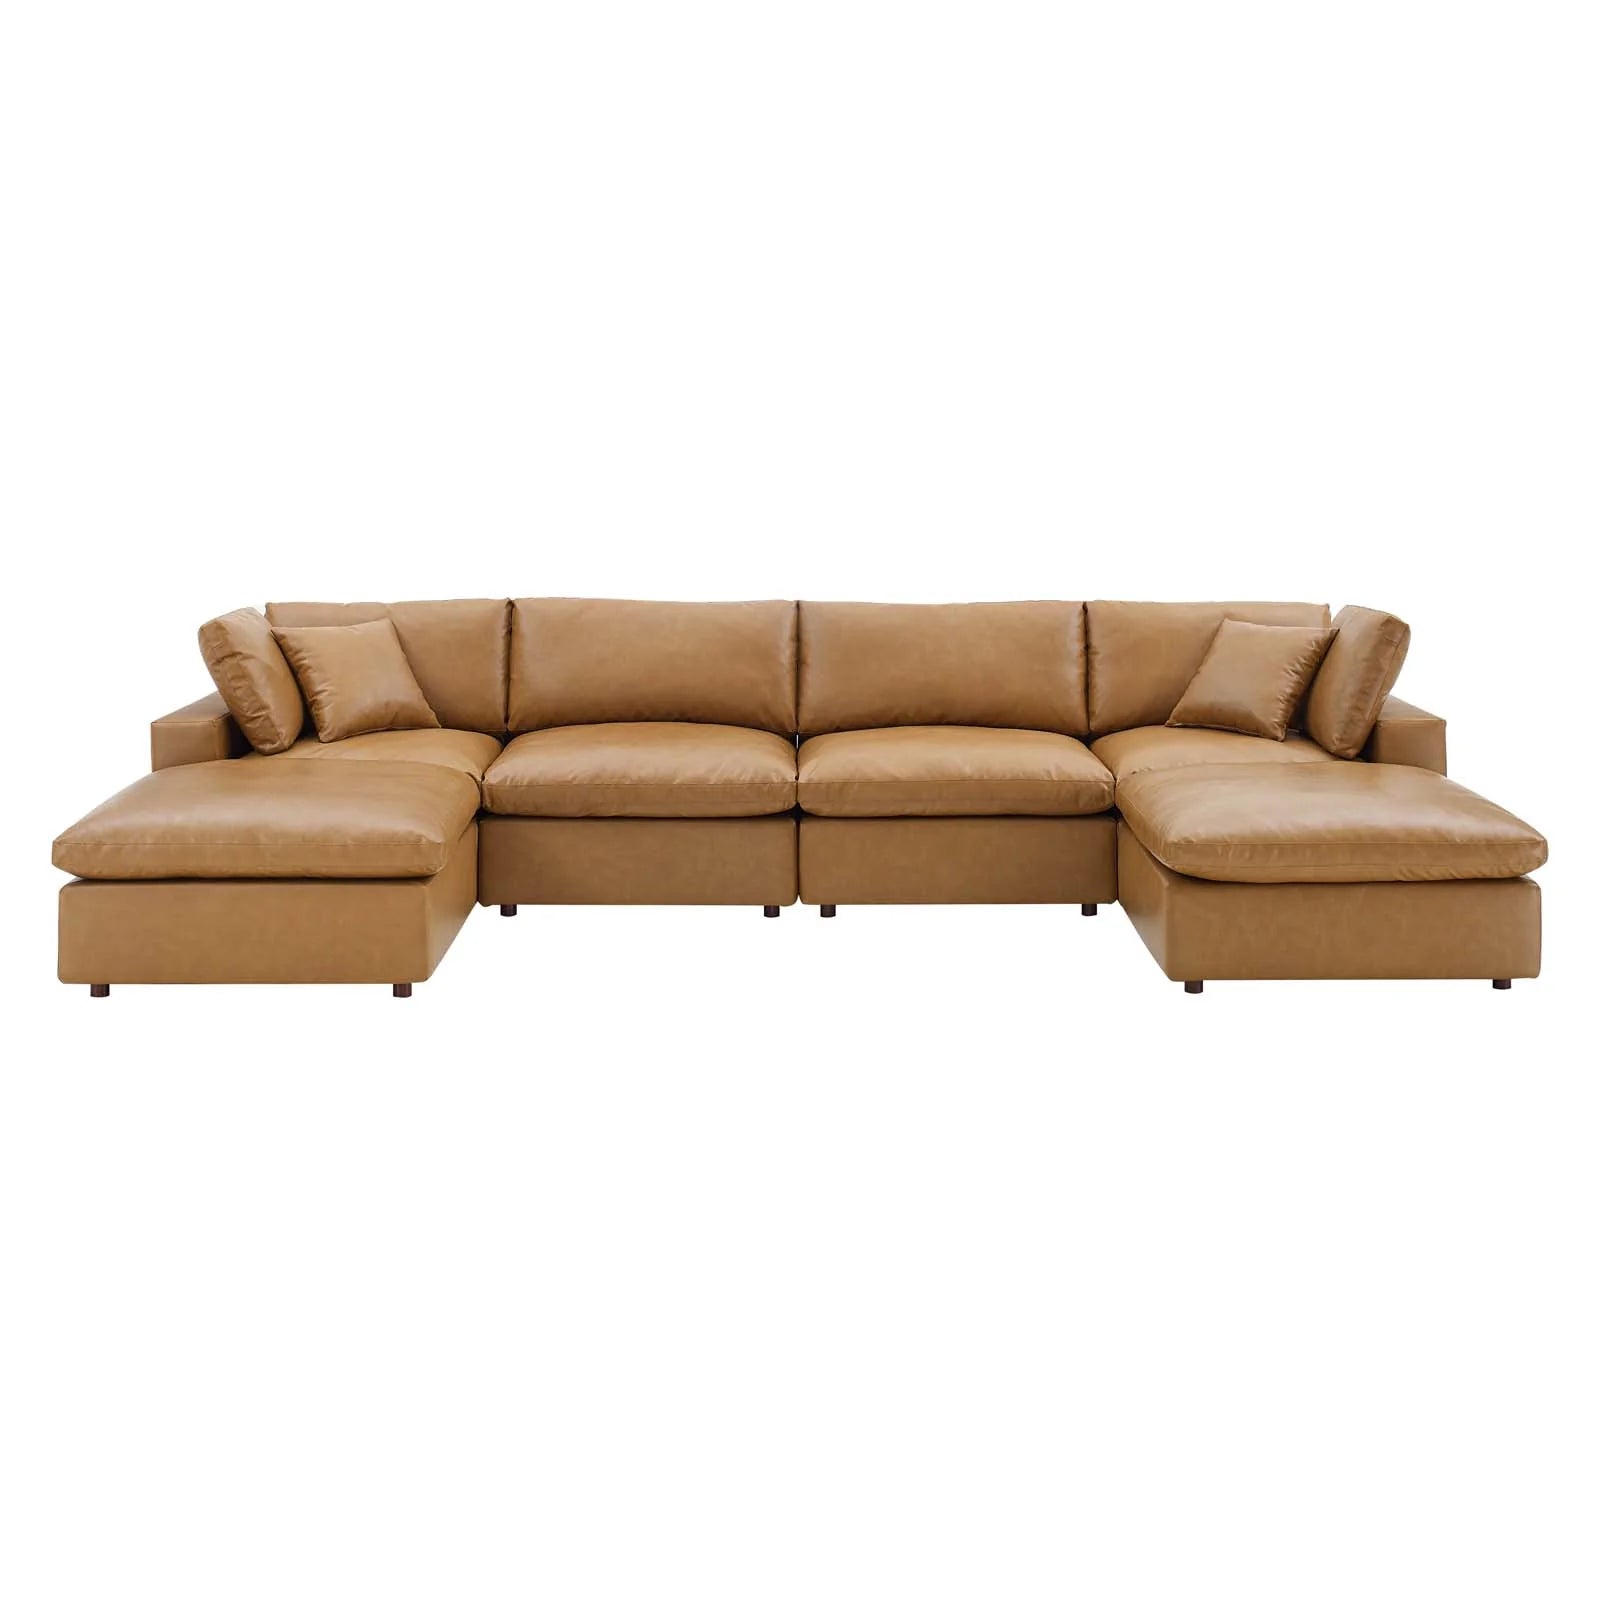 Commix Down Filled Overstuffed Vegan Leather 6-Piece Sectional Sofa - Elite Maison